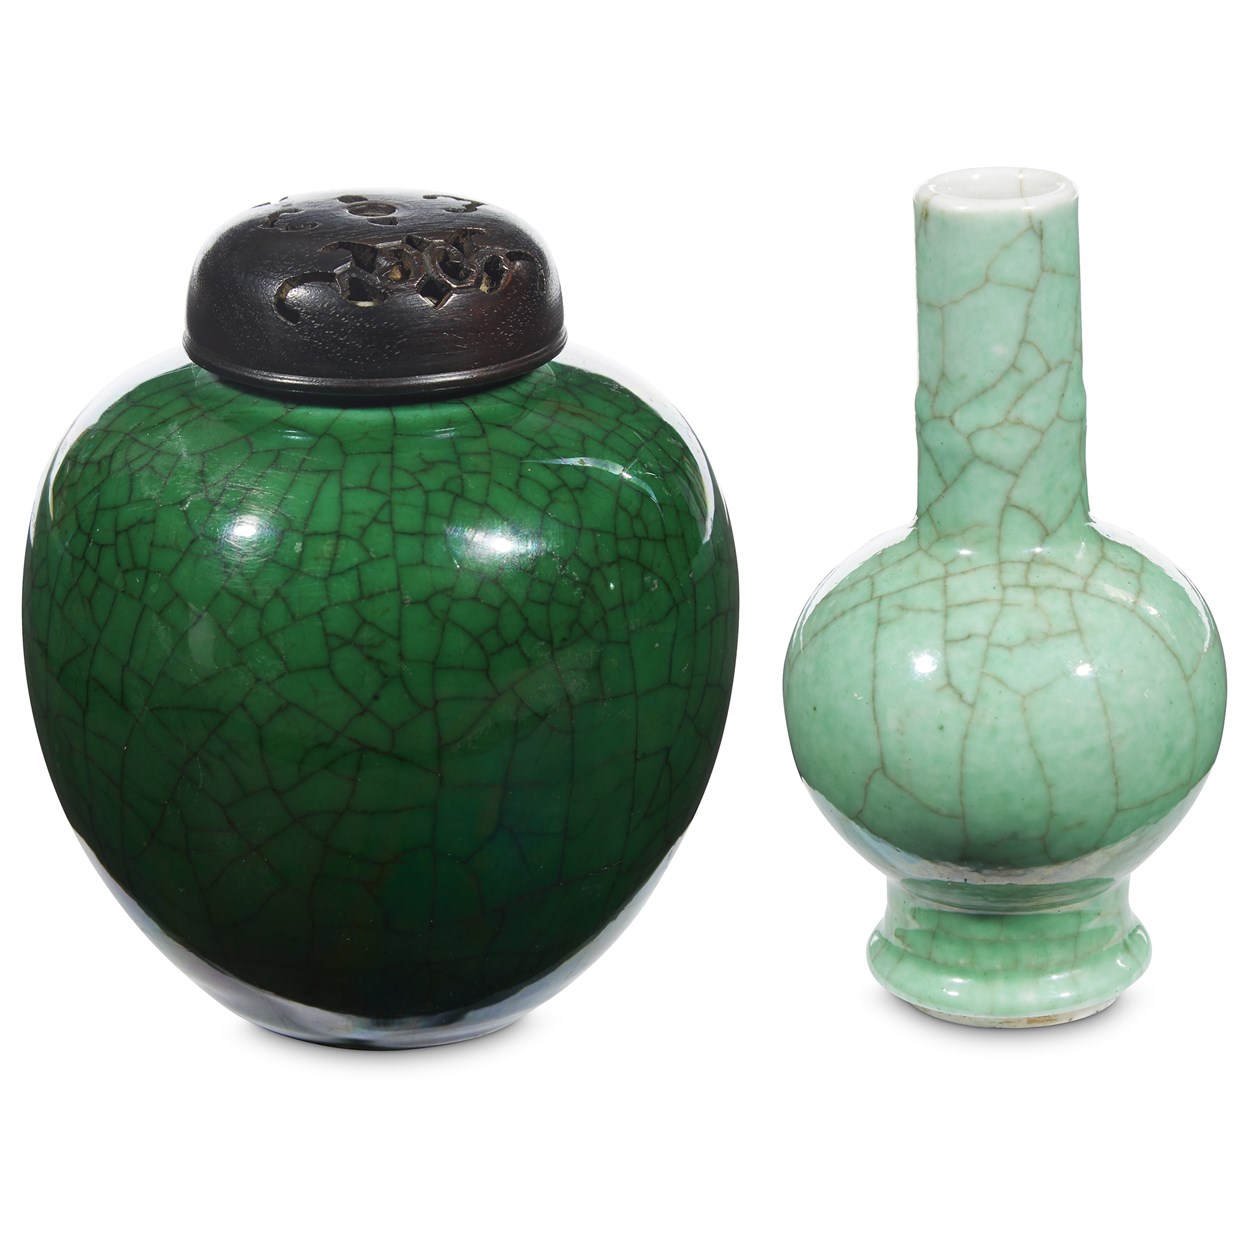 Lot 145 - A Chinese green-glazed porcelain small vase and an ovoid jar